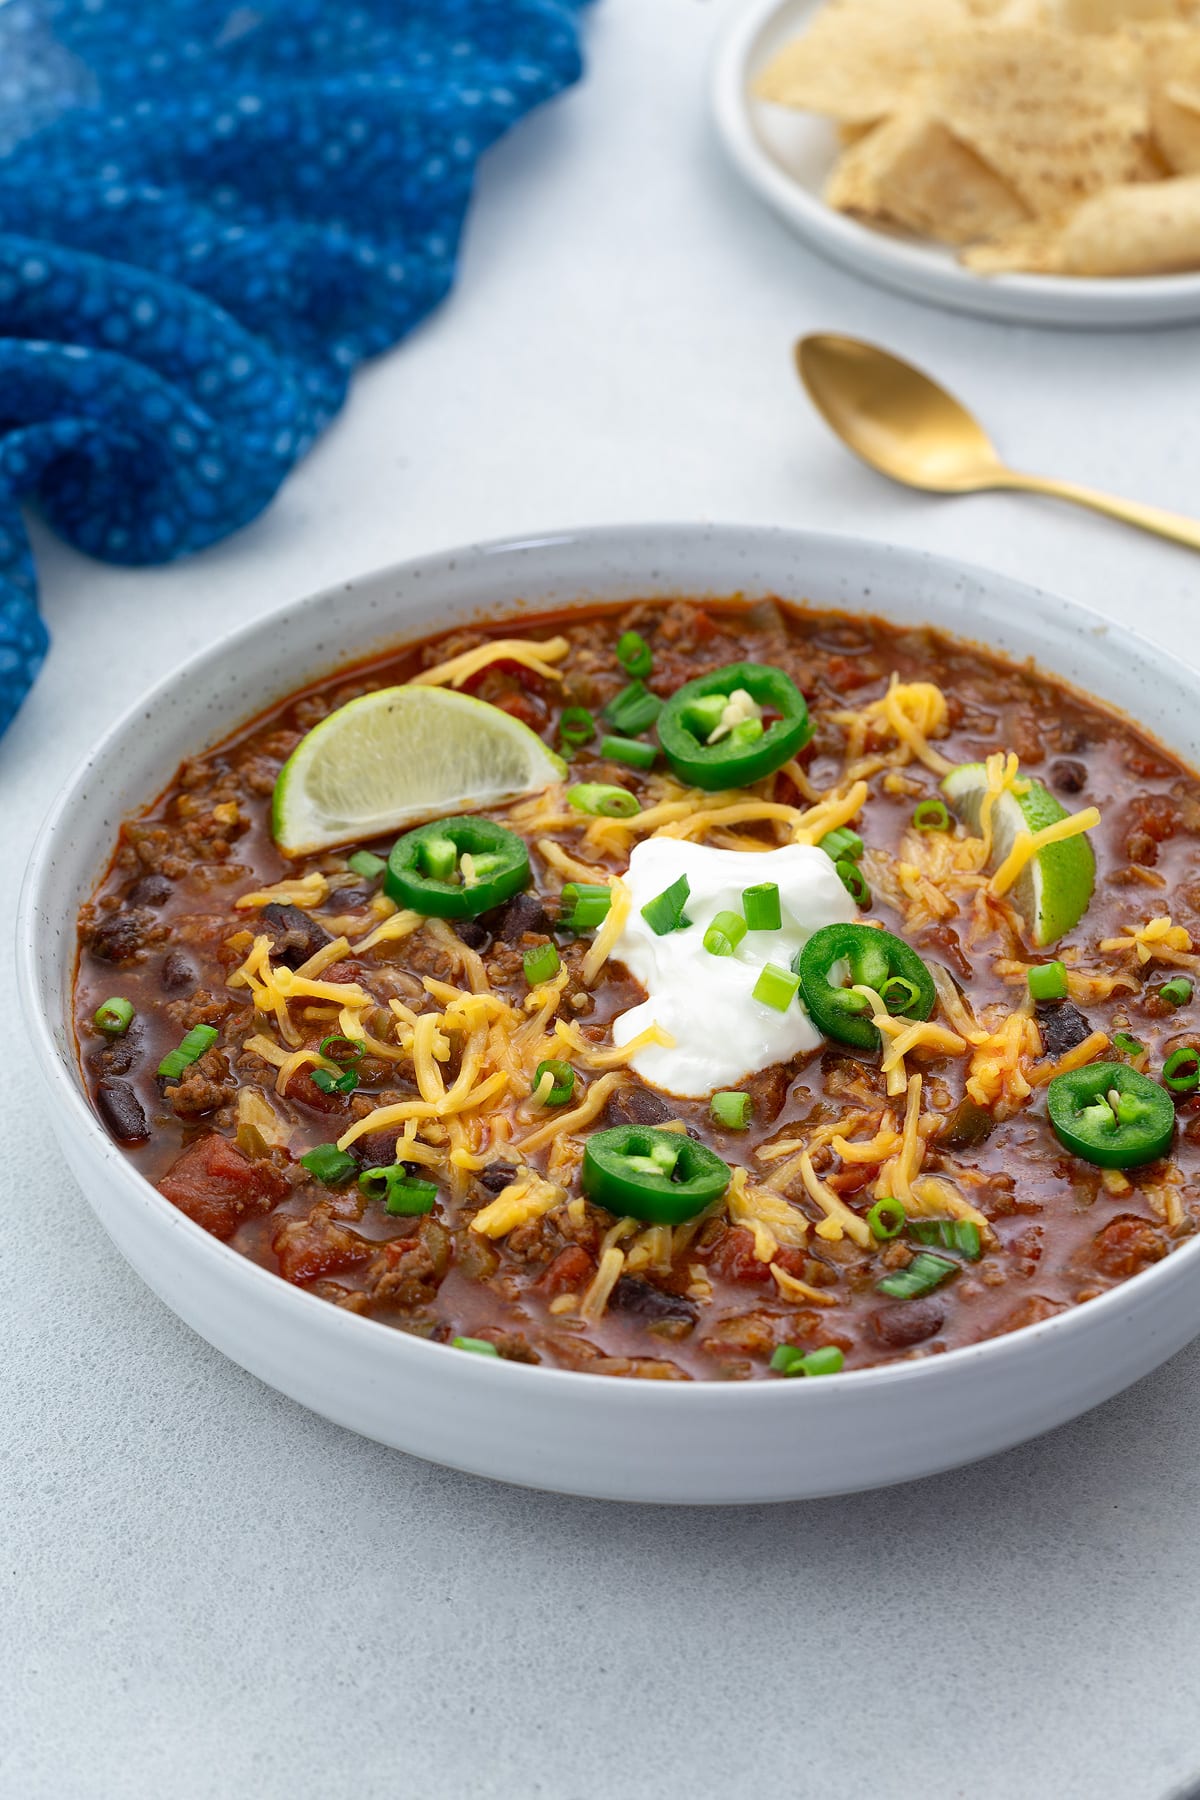 Beef chili in a white bowl on a white table with various toppings. A blue towel, chips on a plate, and a golden spoon nearby.